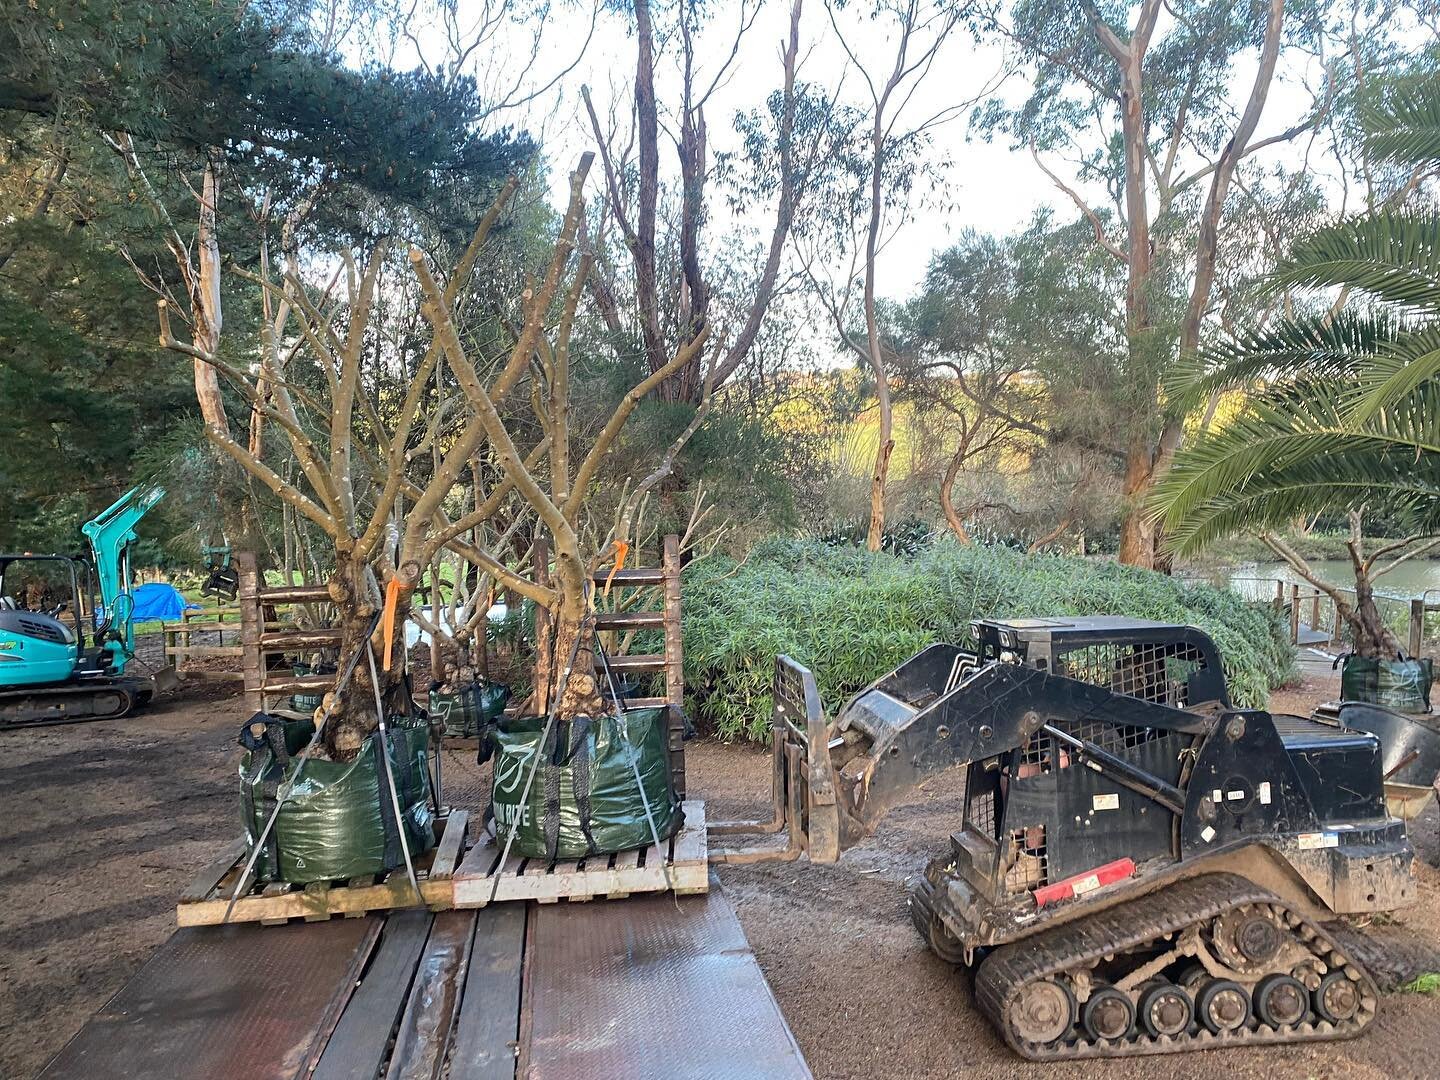 11 of our XL Nevadillo Blanco mature olive trees heading to Healesville. Now these will make an impact! 🌳 💥 

#gardengrowntrees #morningtonpeninsula #olivetrees #matureolives #olivegrove #exorchardolives  #landscaping #landscapingdesign #landscaped